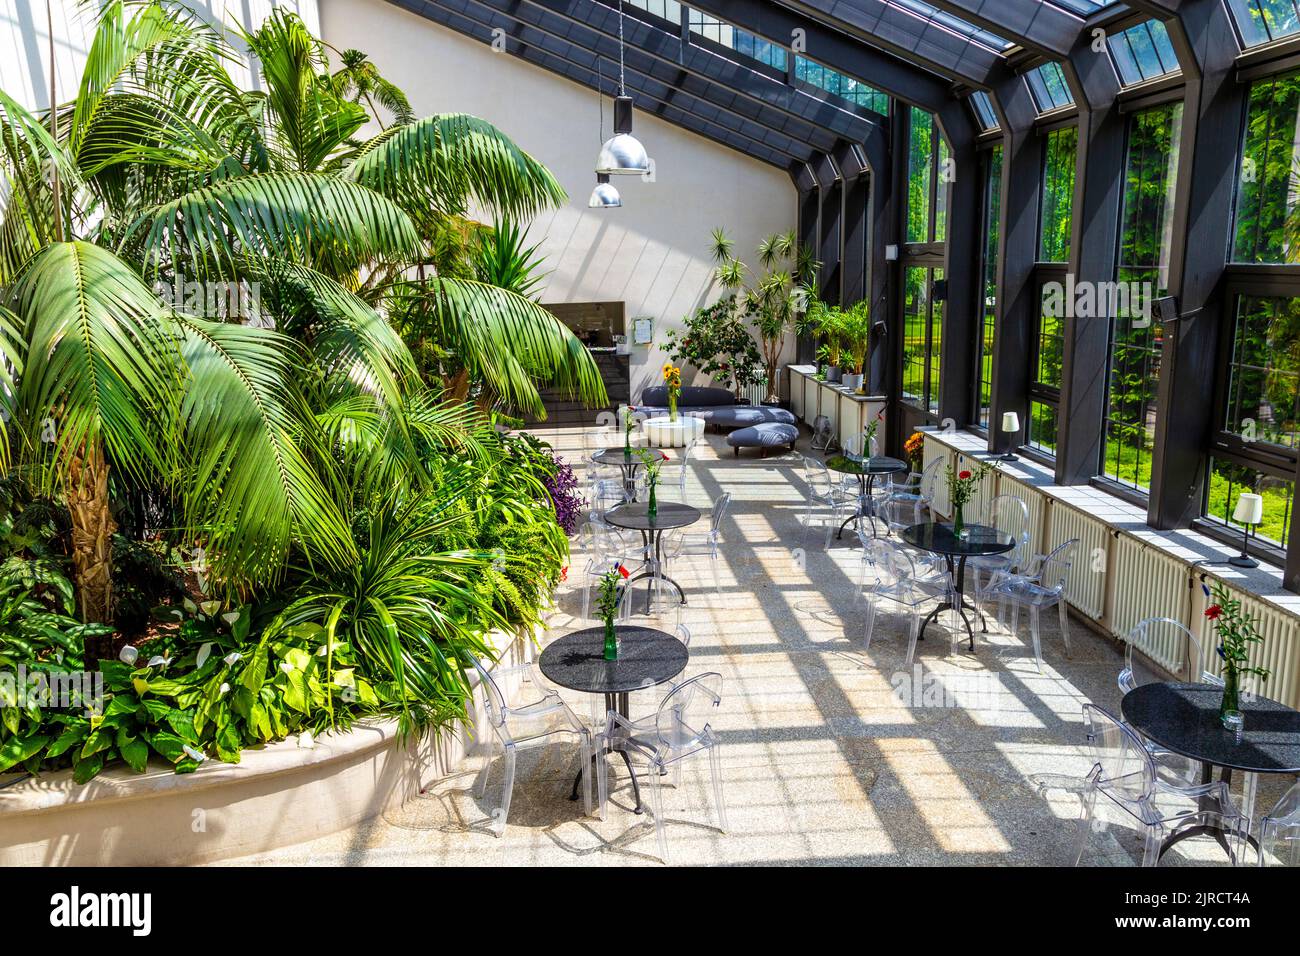 Glasshouse cafe with palm trees overlooking palace gardens at Wilanow Palace, Warsaw, Poland Stock Photo